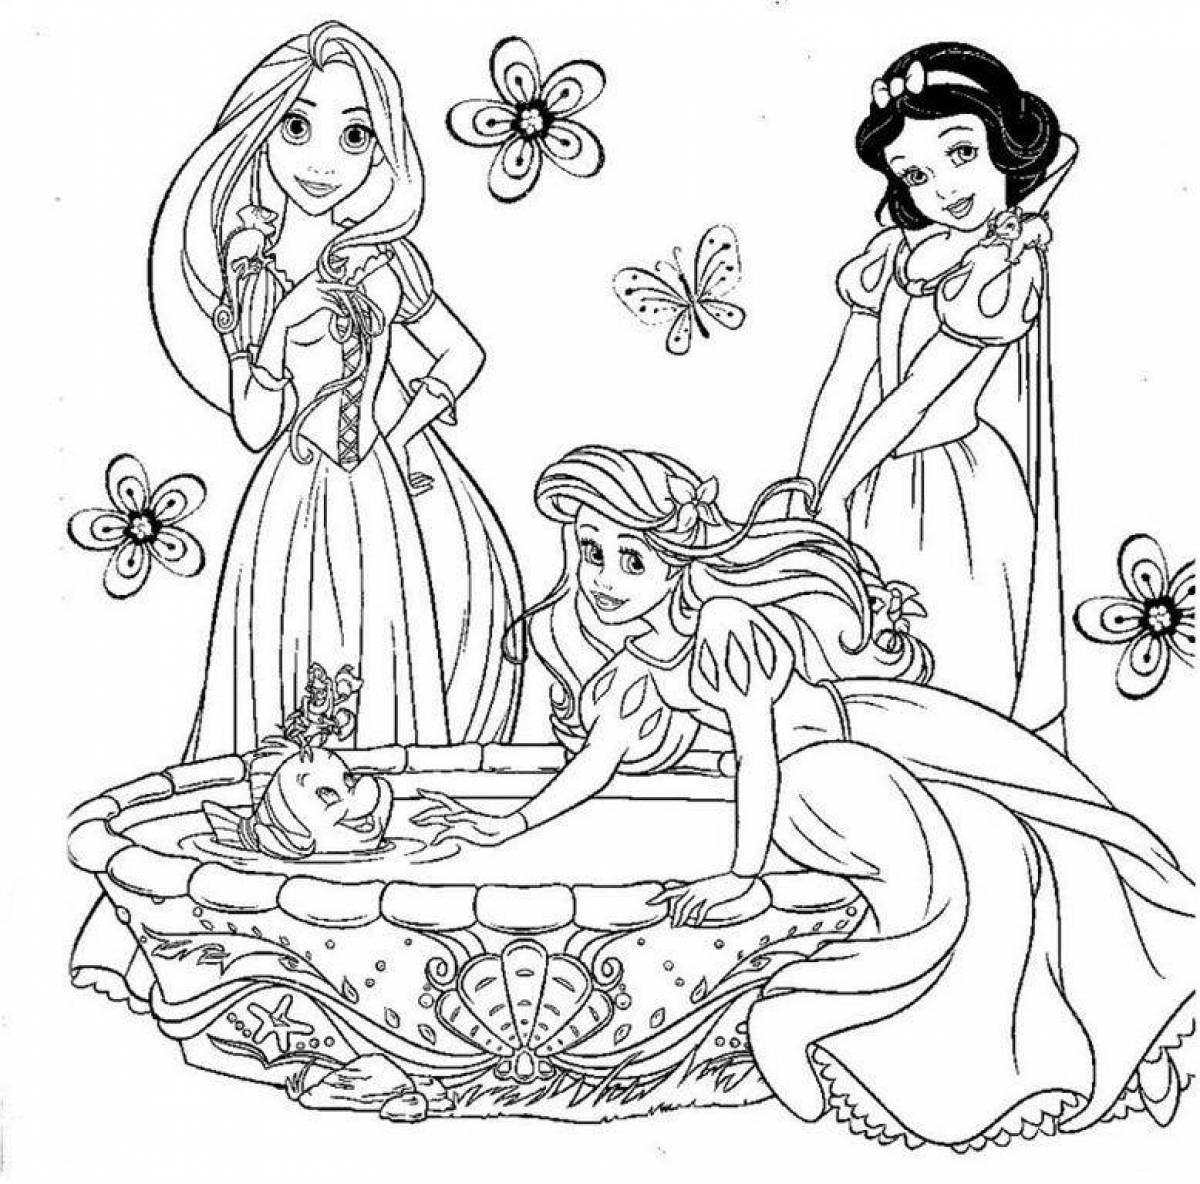 Shining coloring book for children 6-7 years old princess